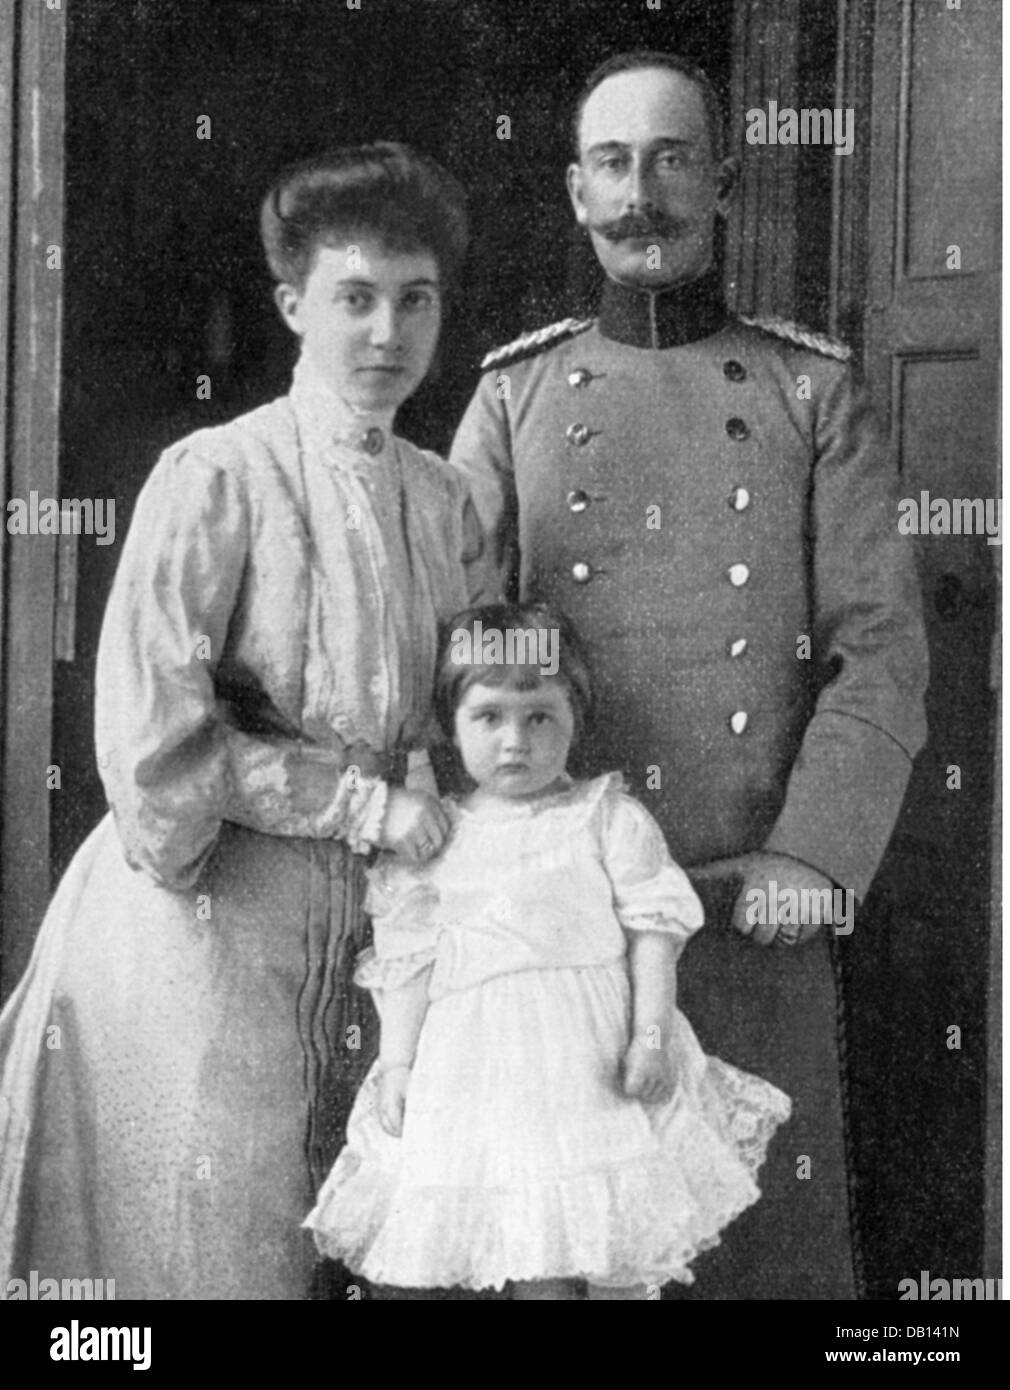 Maximilian, 10.7.1867 - 6.11.1929, prince of Baden, German politician, with wife Marie Louise and daughter Marie Alexandra, circa 1906, Stock Photo